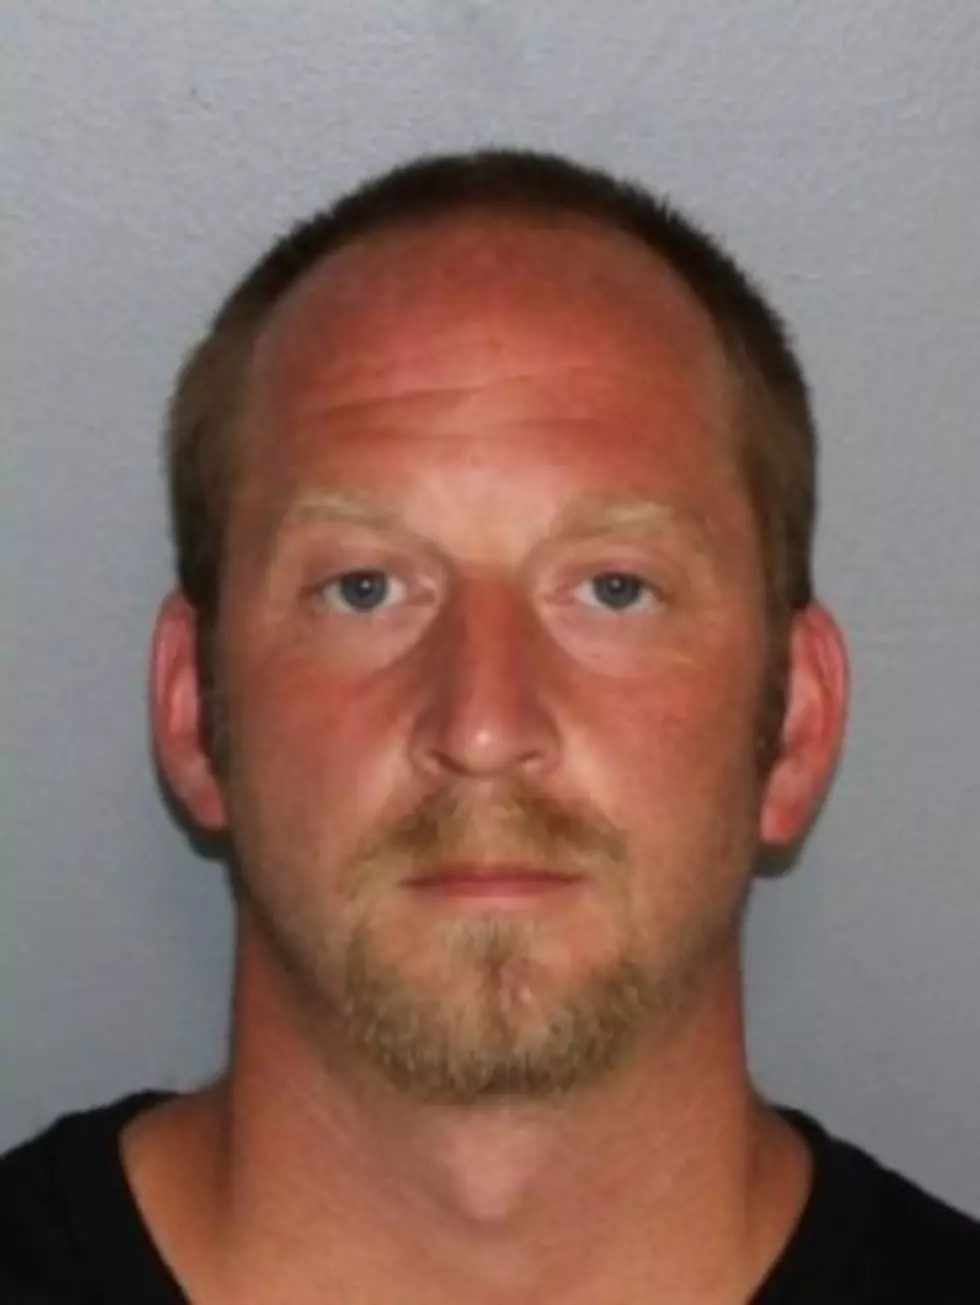 Toms River Truck Driver thief “Jeff” has been found and charged by State Police